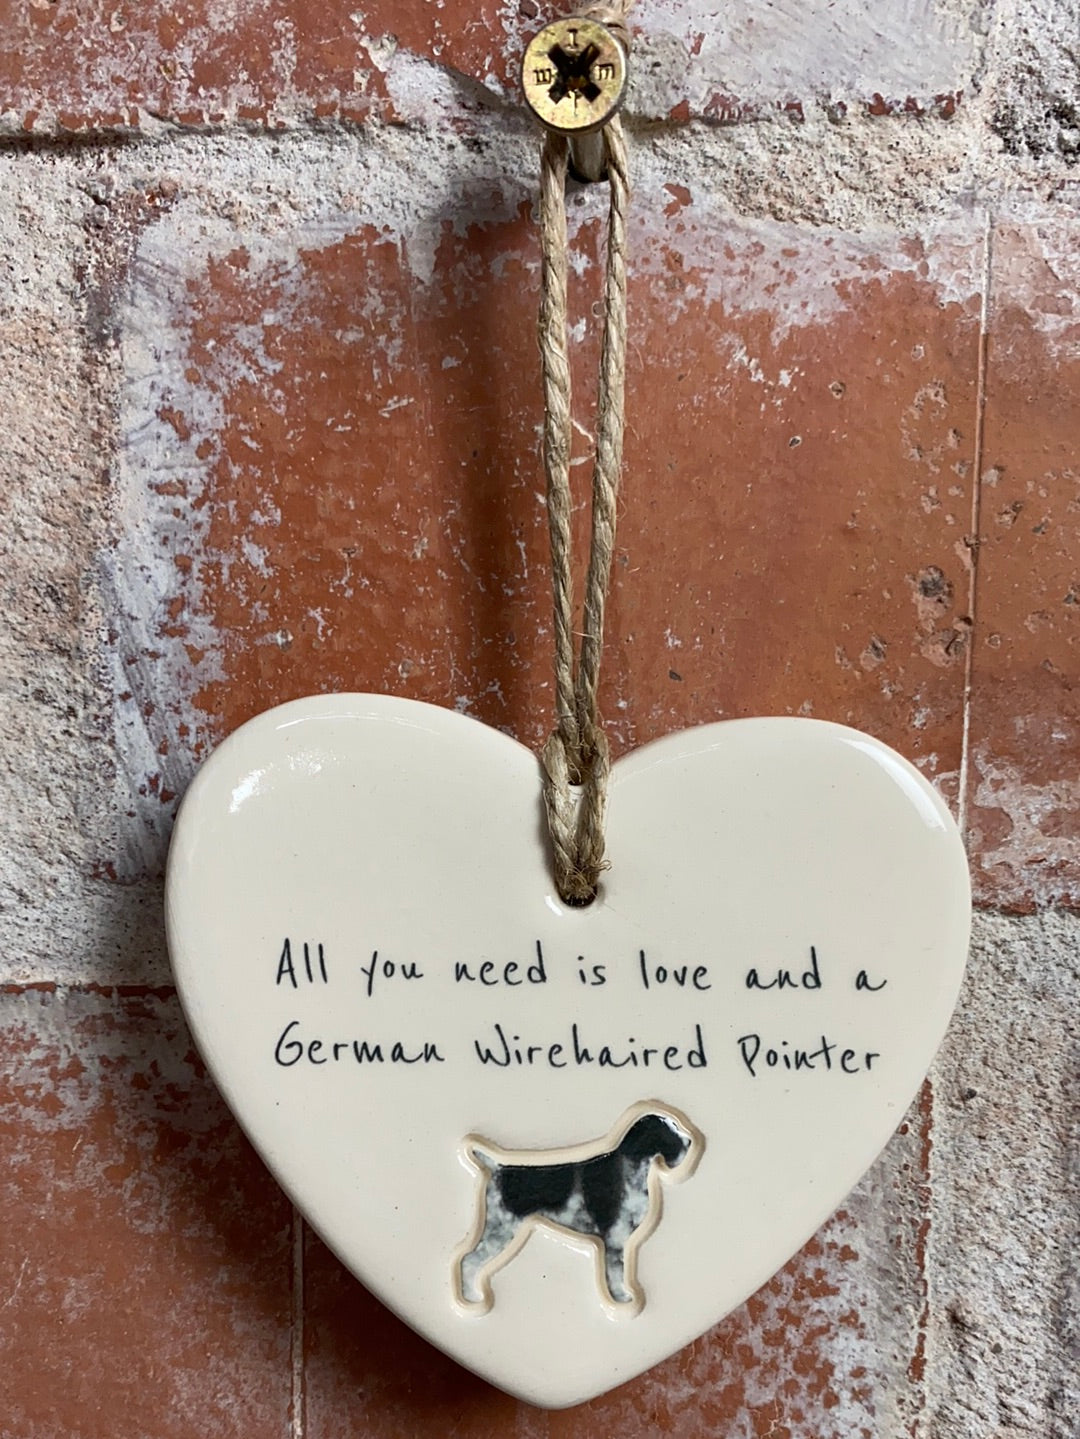 German Wirehaired Pointer heart